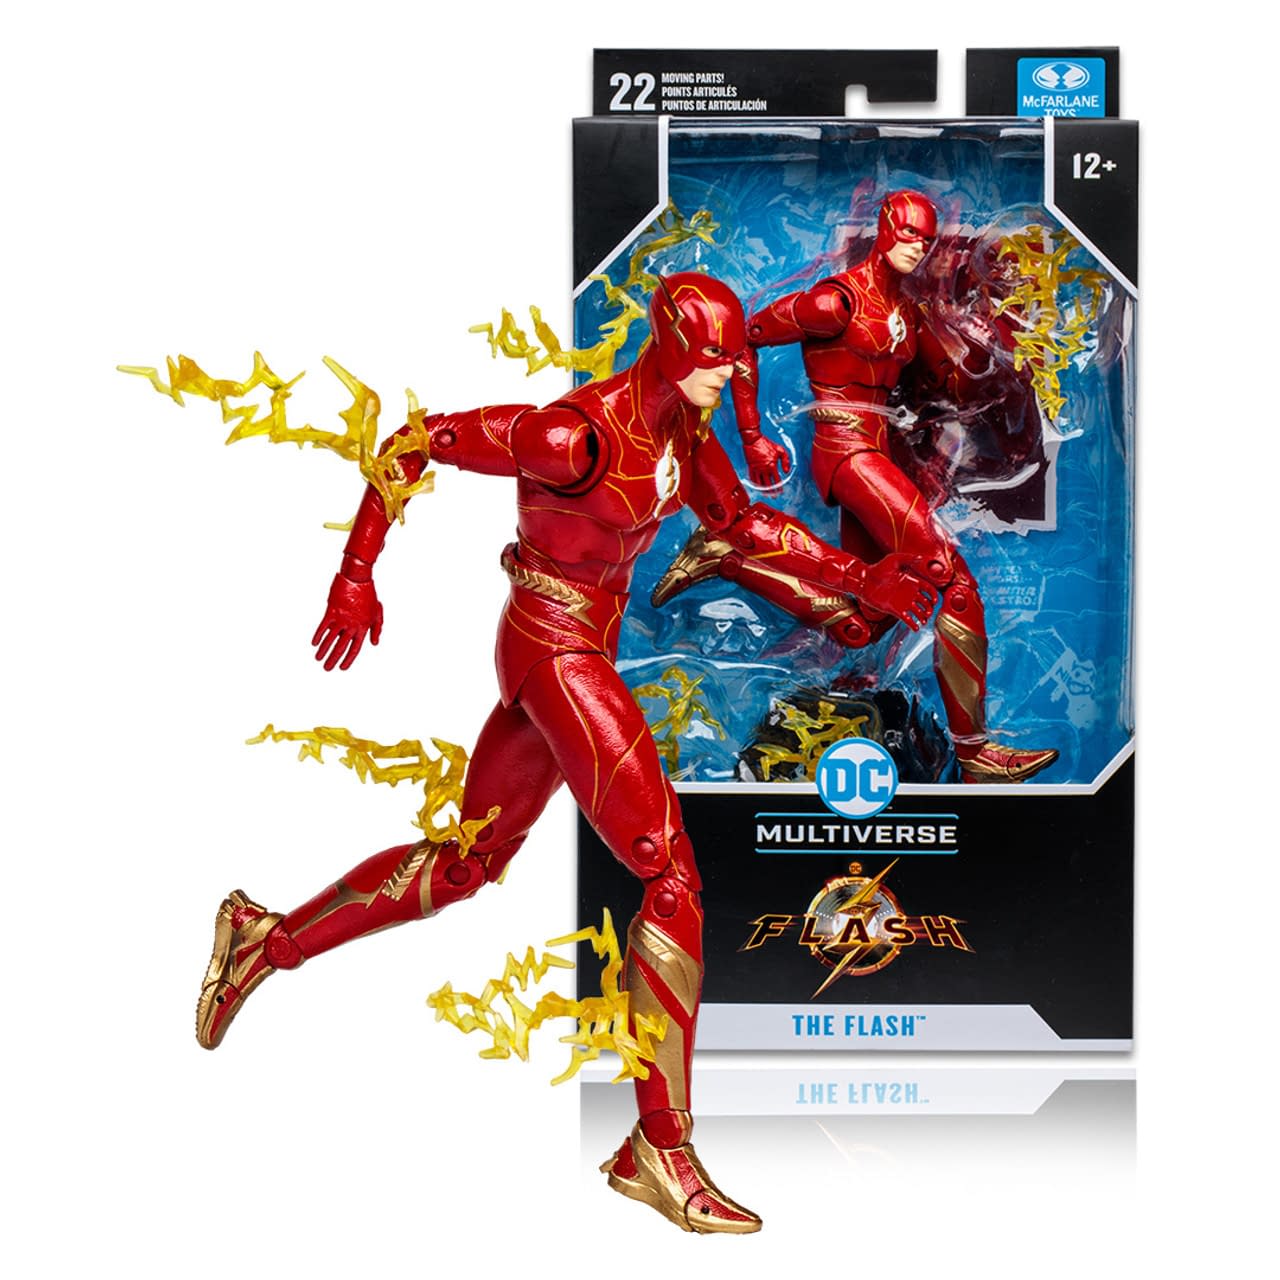 Bring Home the DC Multiverse with Our The Flash Gift Guide 